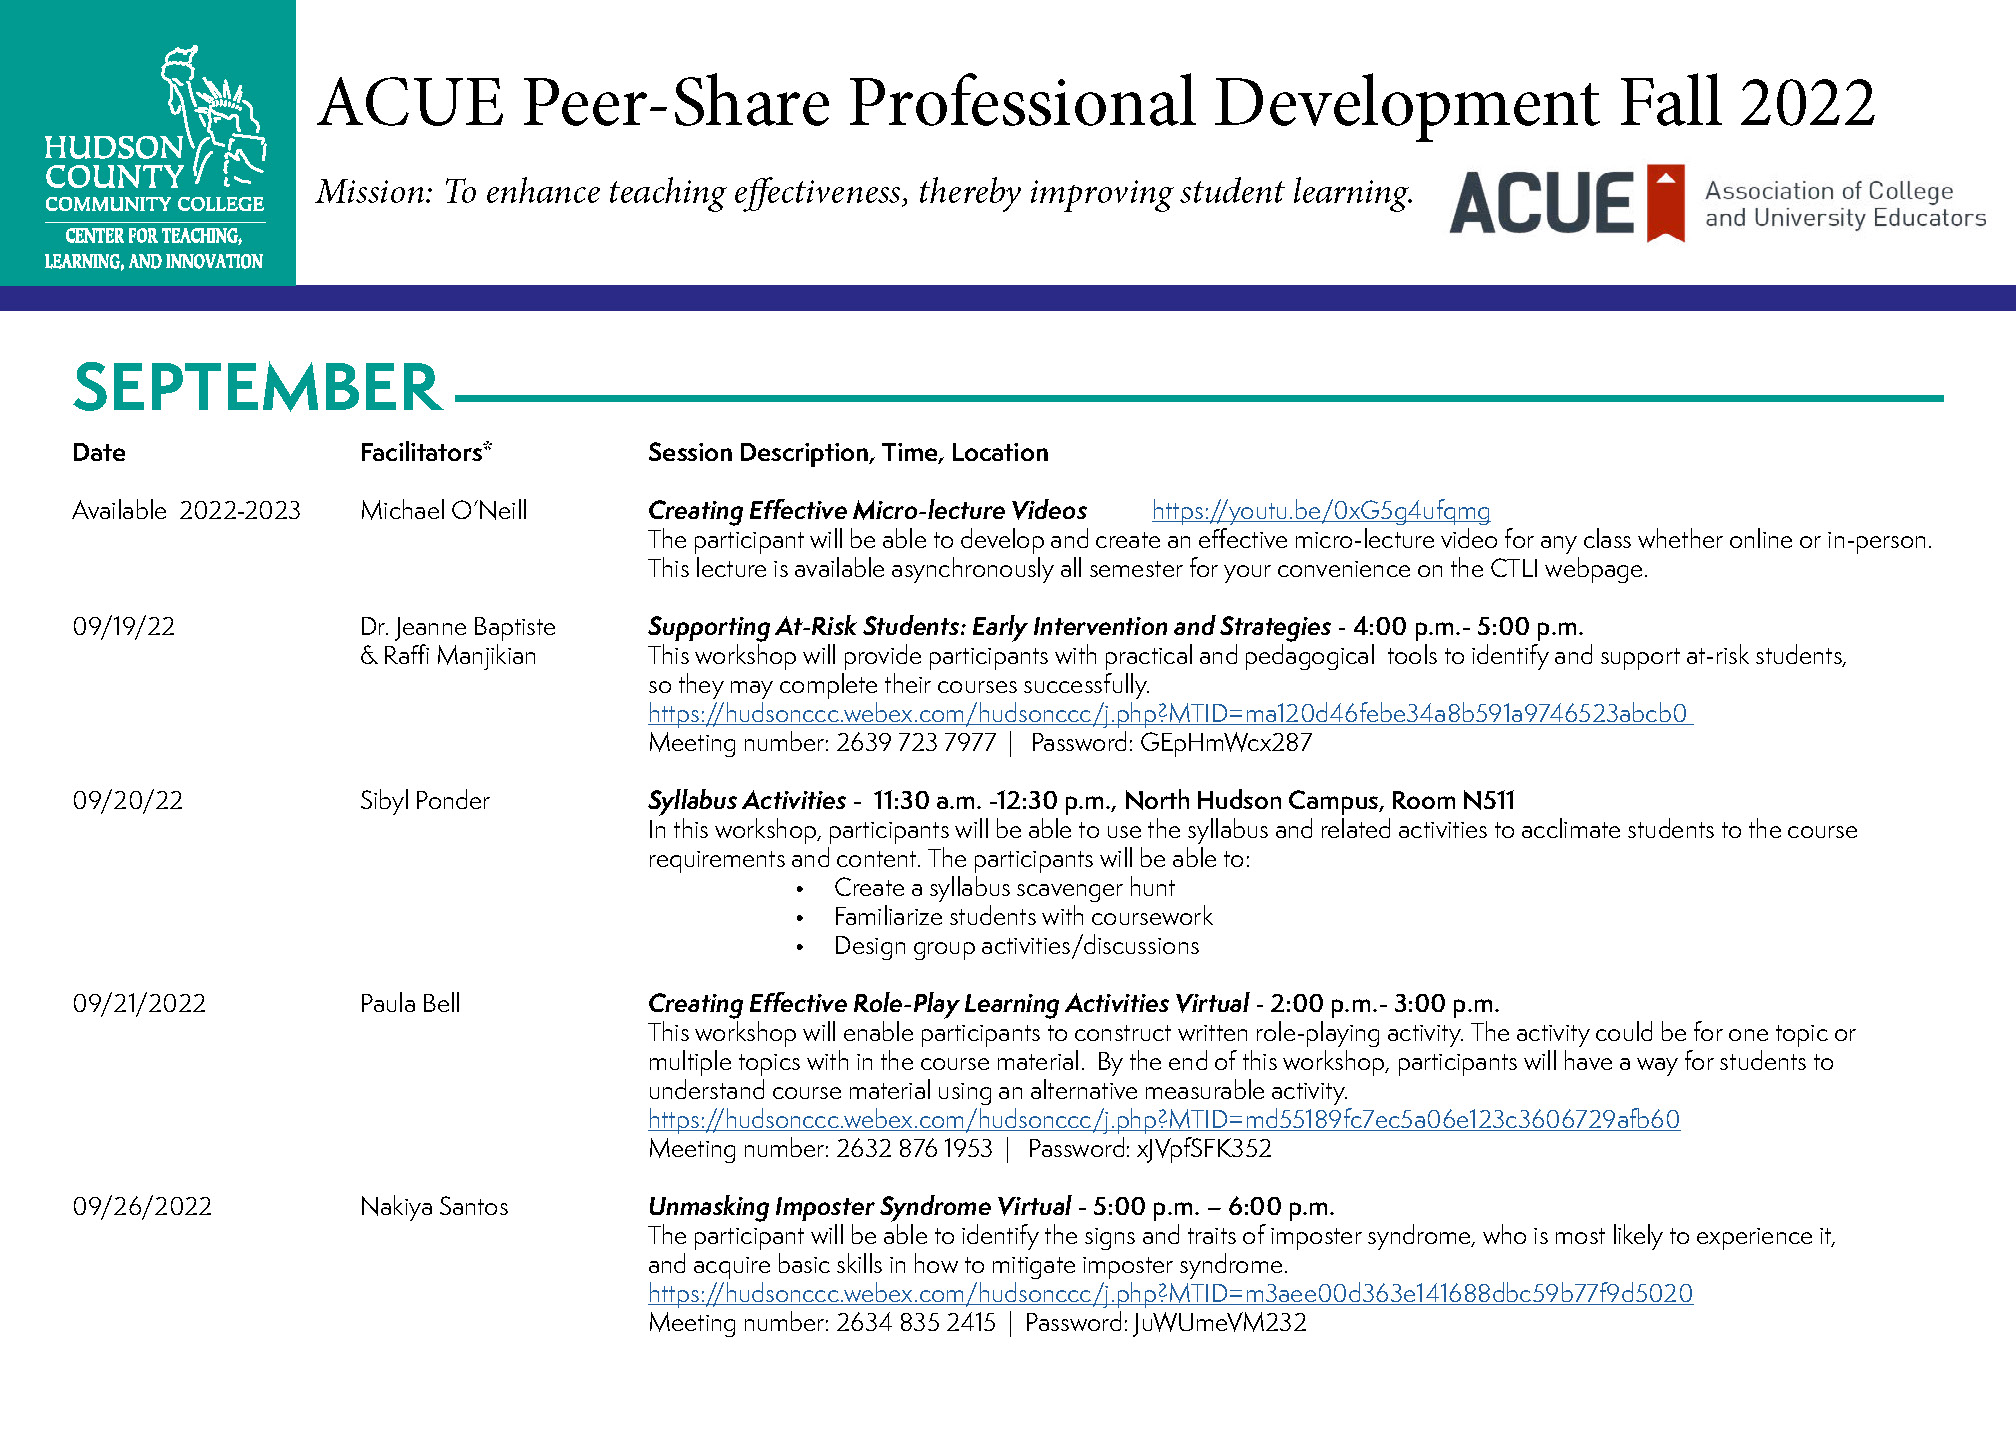 ACUE Peer-Share Professional Development Fall 2022 - September Schedule